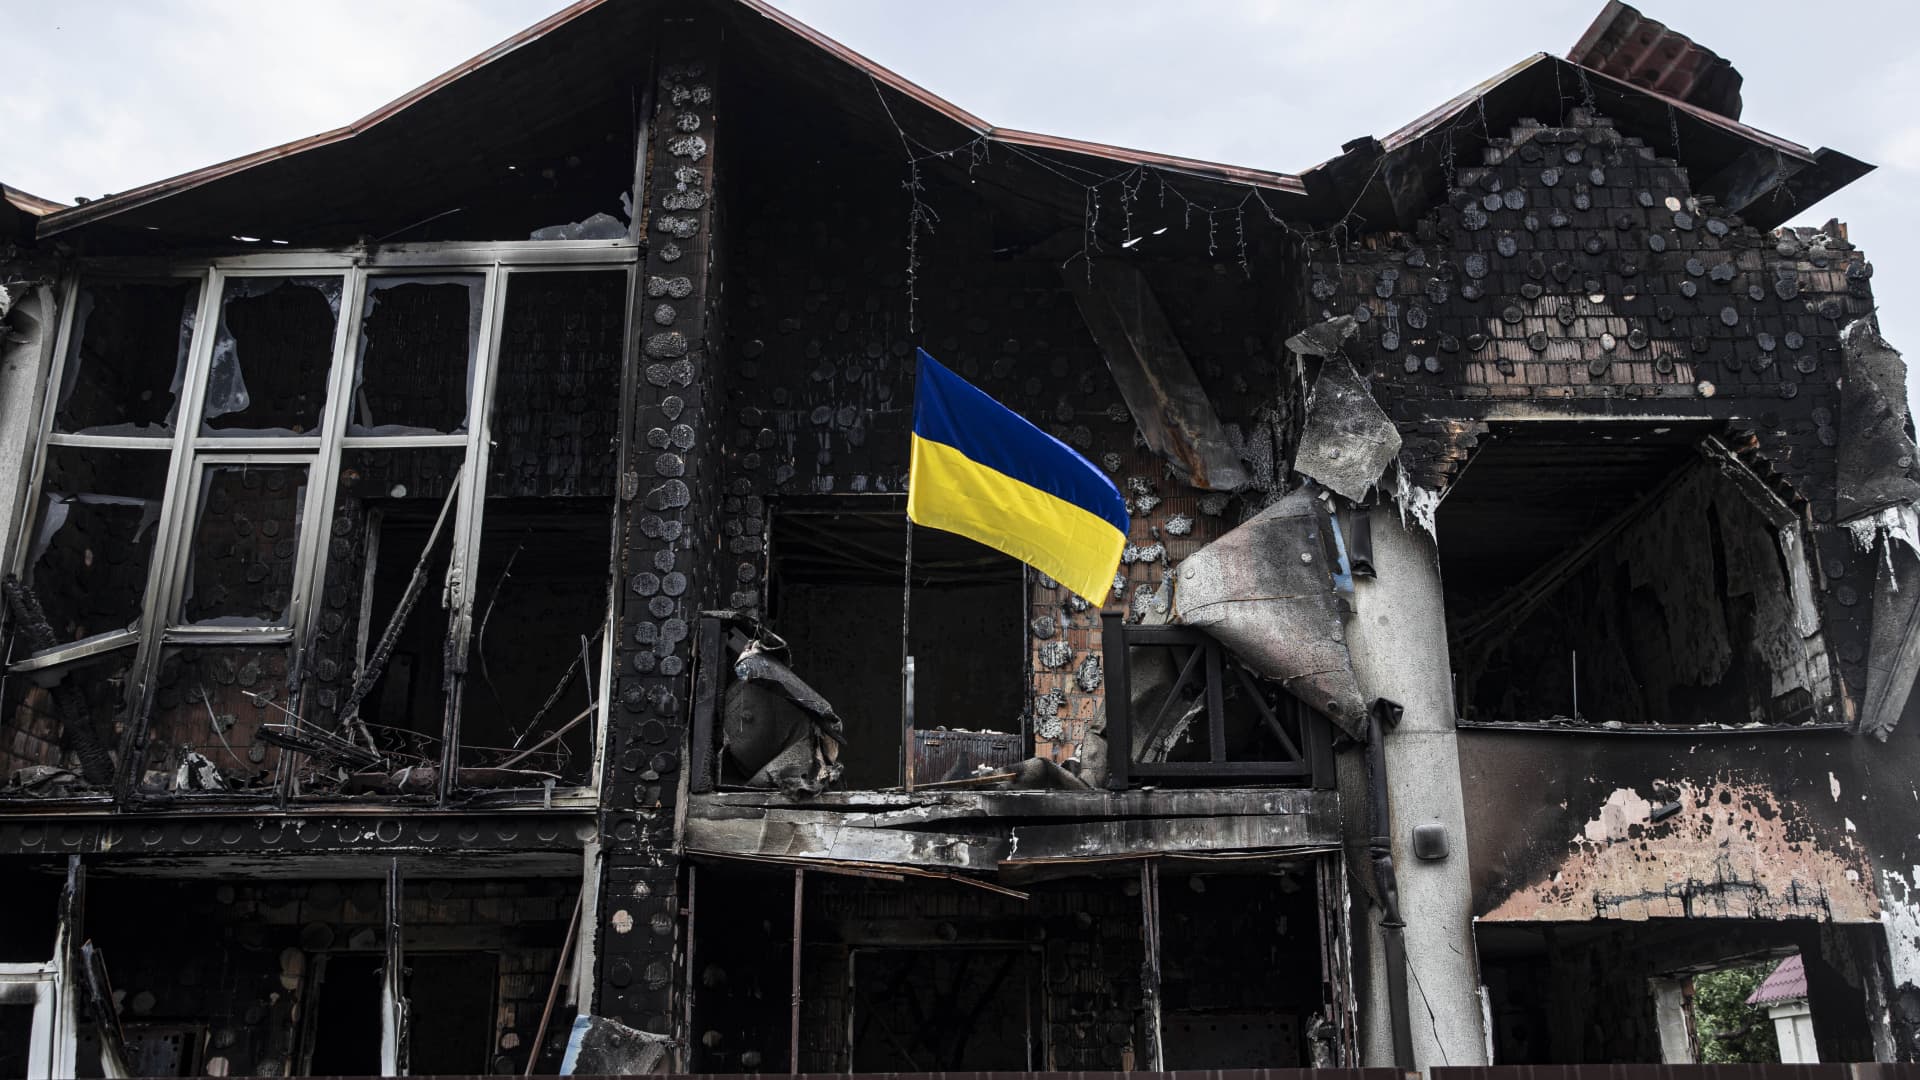 A view of devastation after conflicts as Ukrainians trying to rebound back to life Irpin near Kyiv, Ukraine on June 21, 2022.